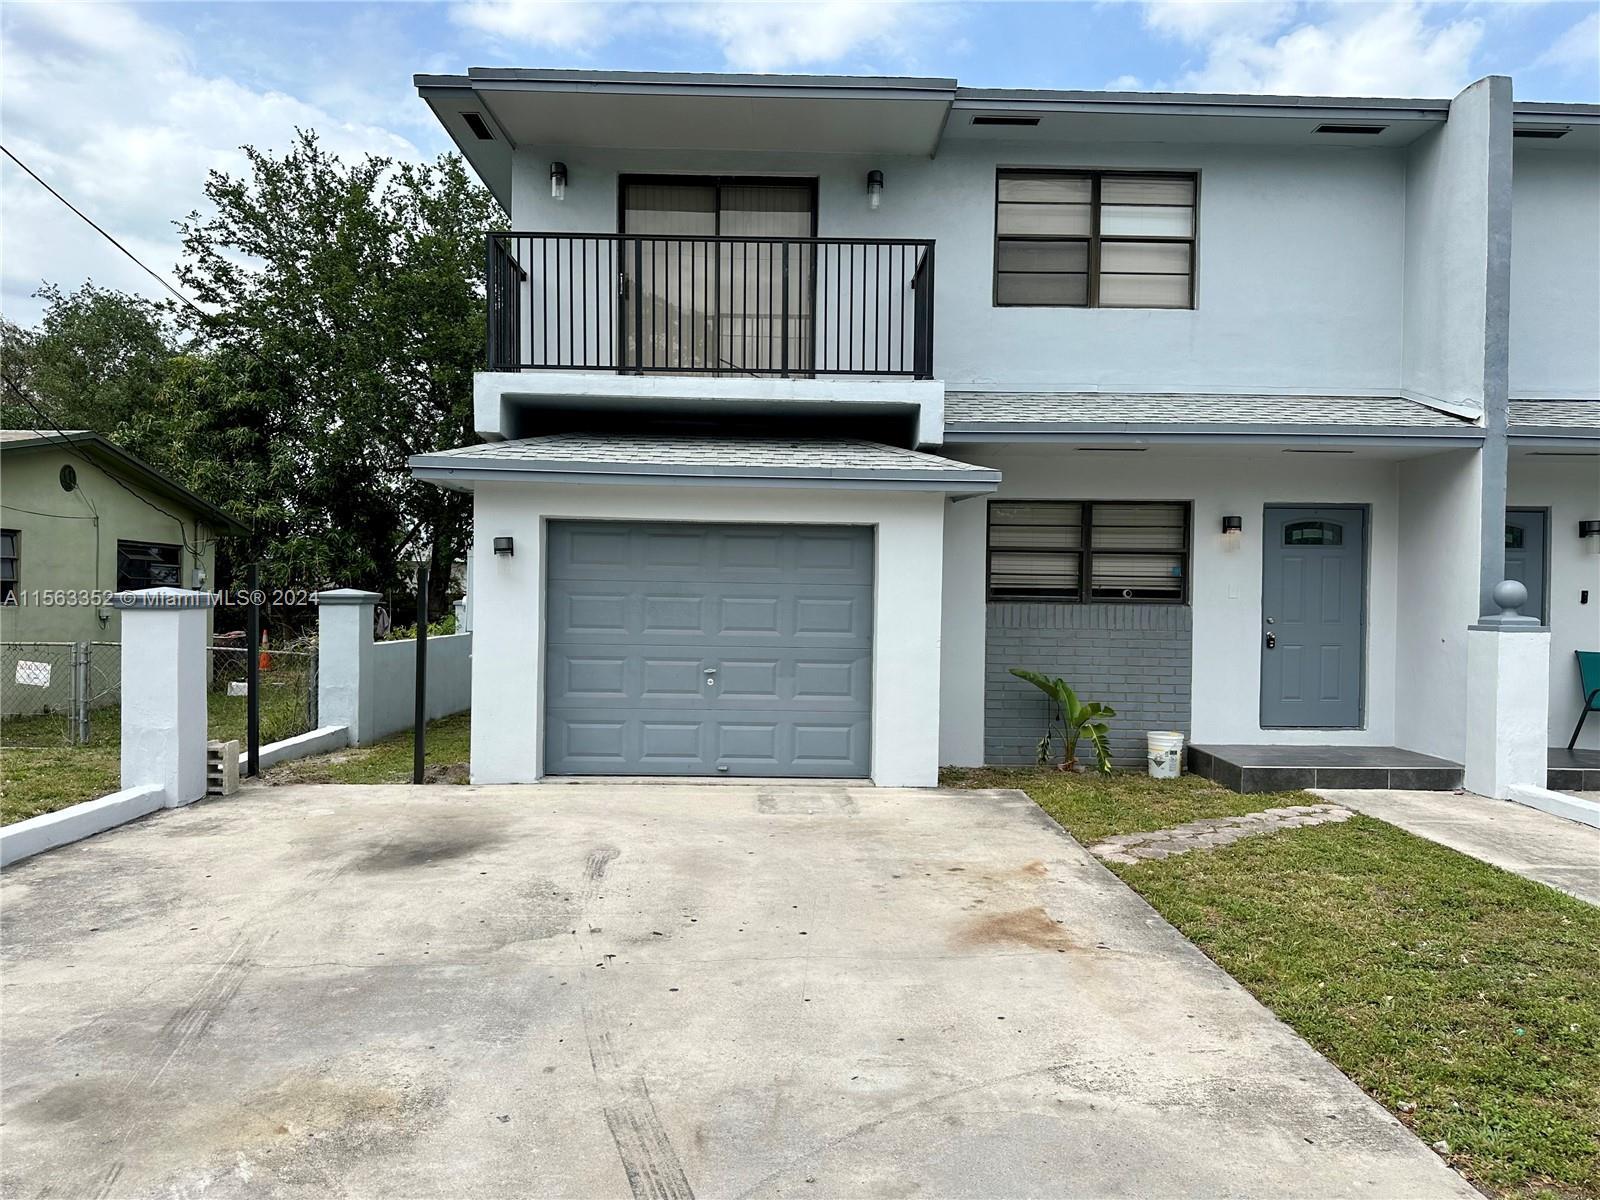 Photo of 2455 NW 93rd St #2455 in Miami, FL